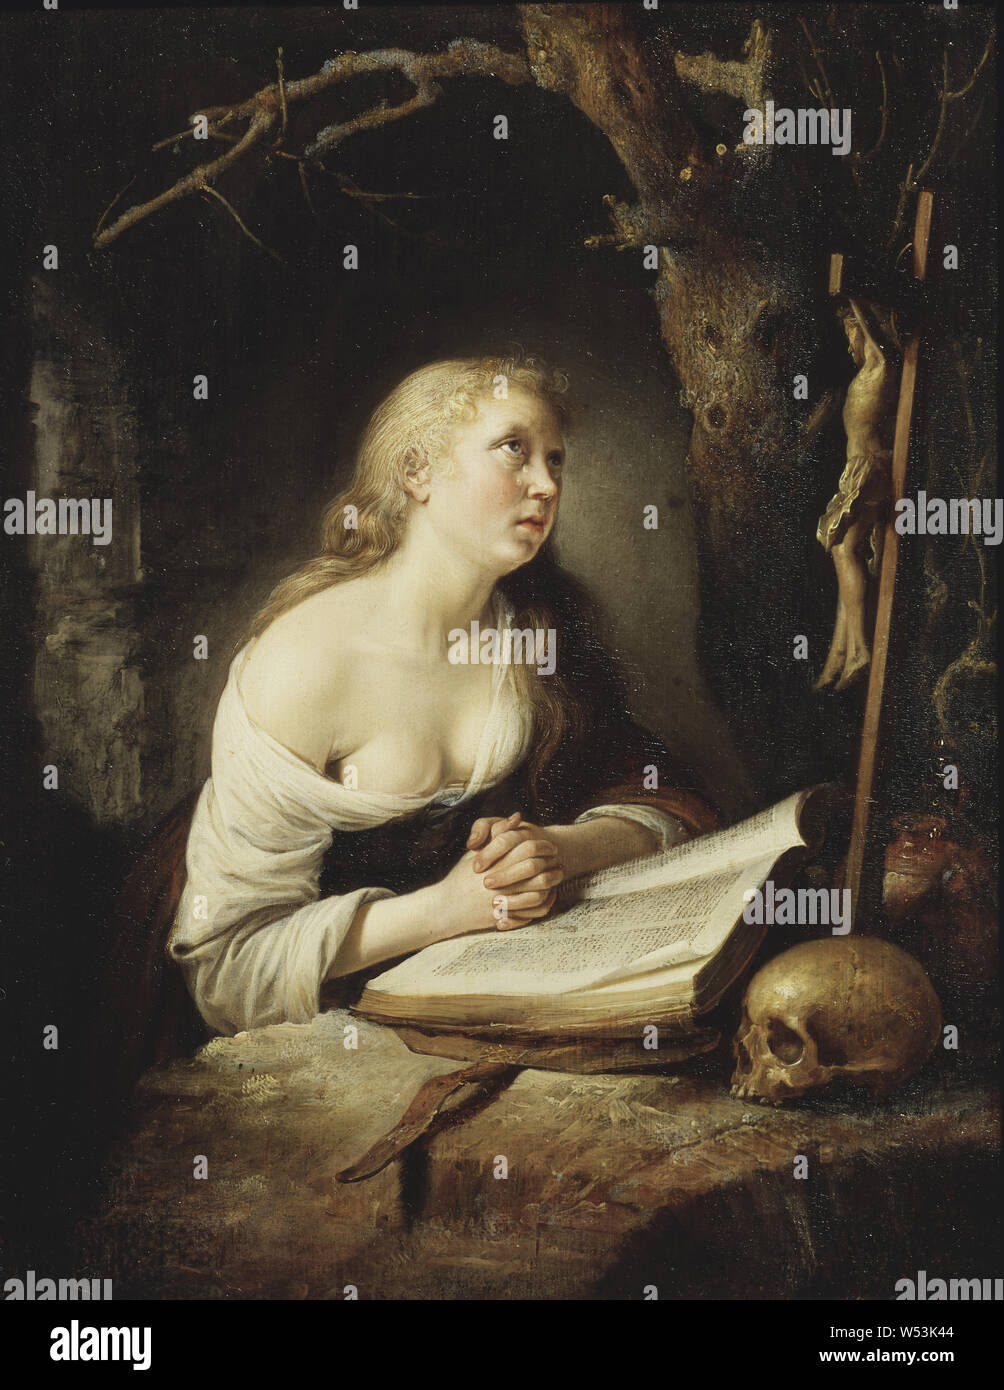 Gerrit Dou, The Penitent Magdalen, The finest Magdalena, painting, religious art, oil on panel, Height, 26 cm (10.2 inches), Width, 19 cm (7.4 inches), Signed, GDOV, right above book Stock Photo